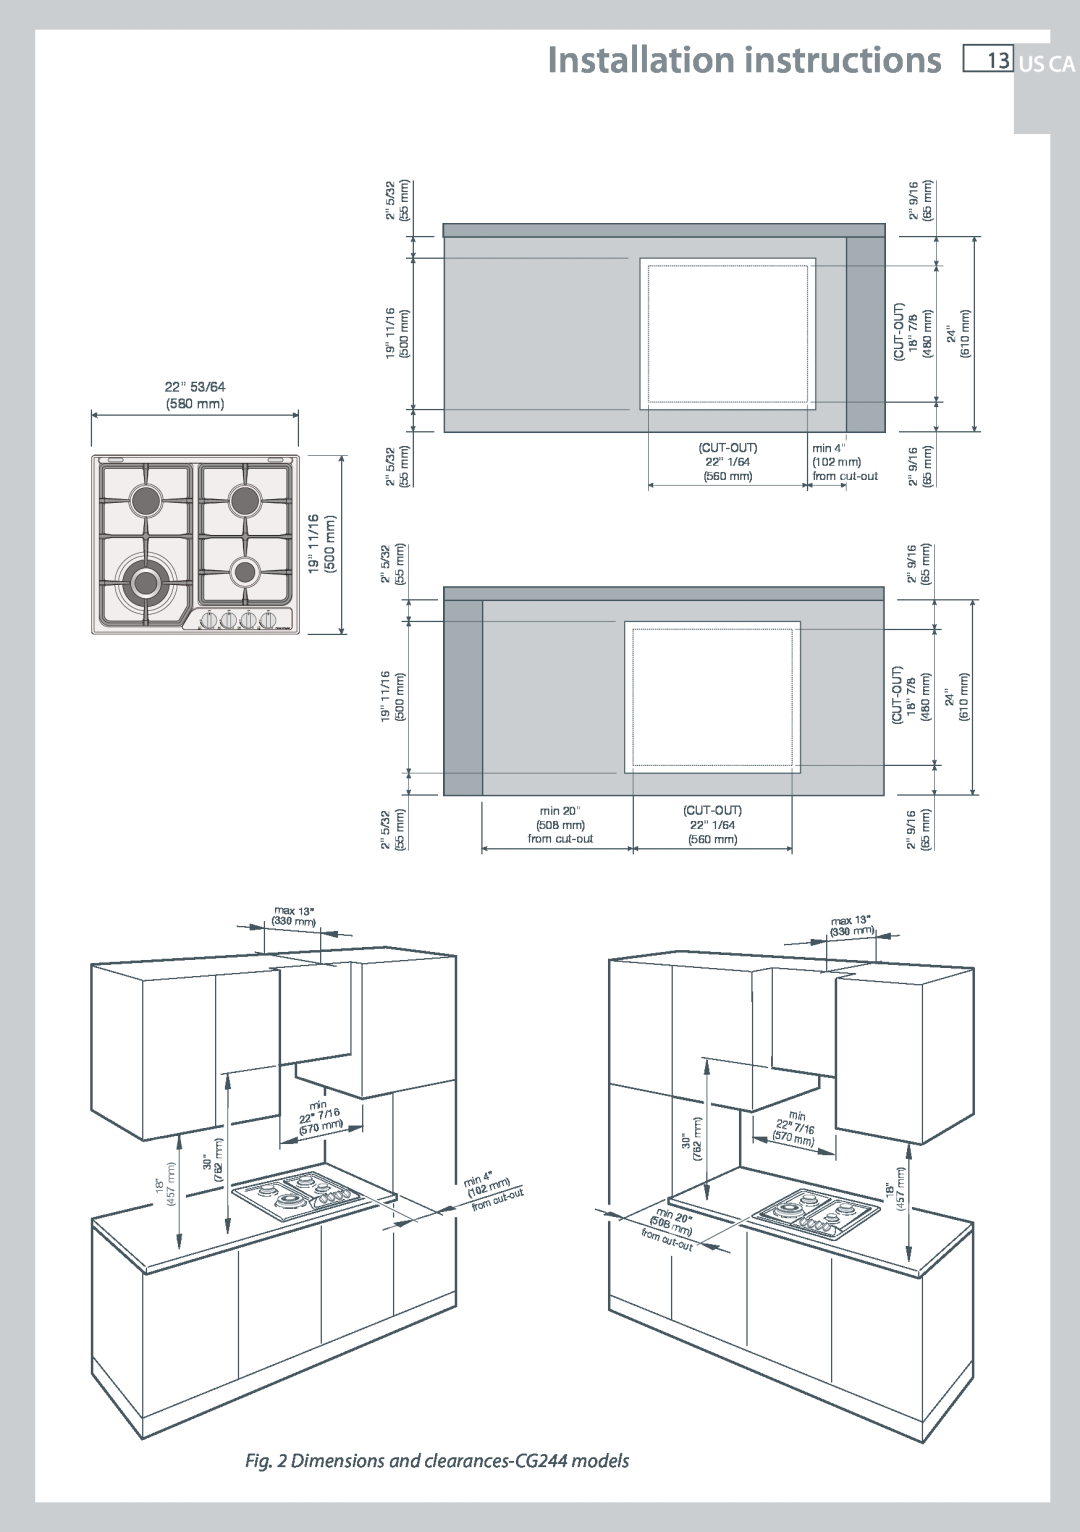 Fisher & Paykel CG122 Installation instructions, Us Ca, Dimensions and clearances-CG244models, 22” 53/64 580 mm 11/16 mm 